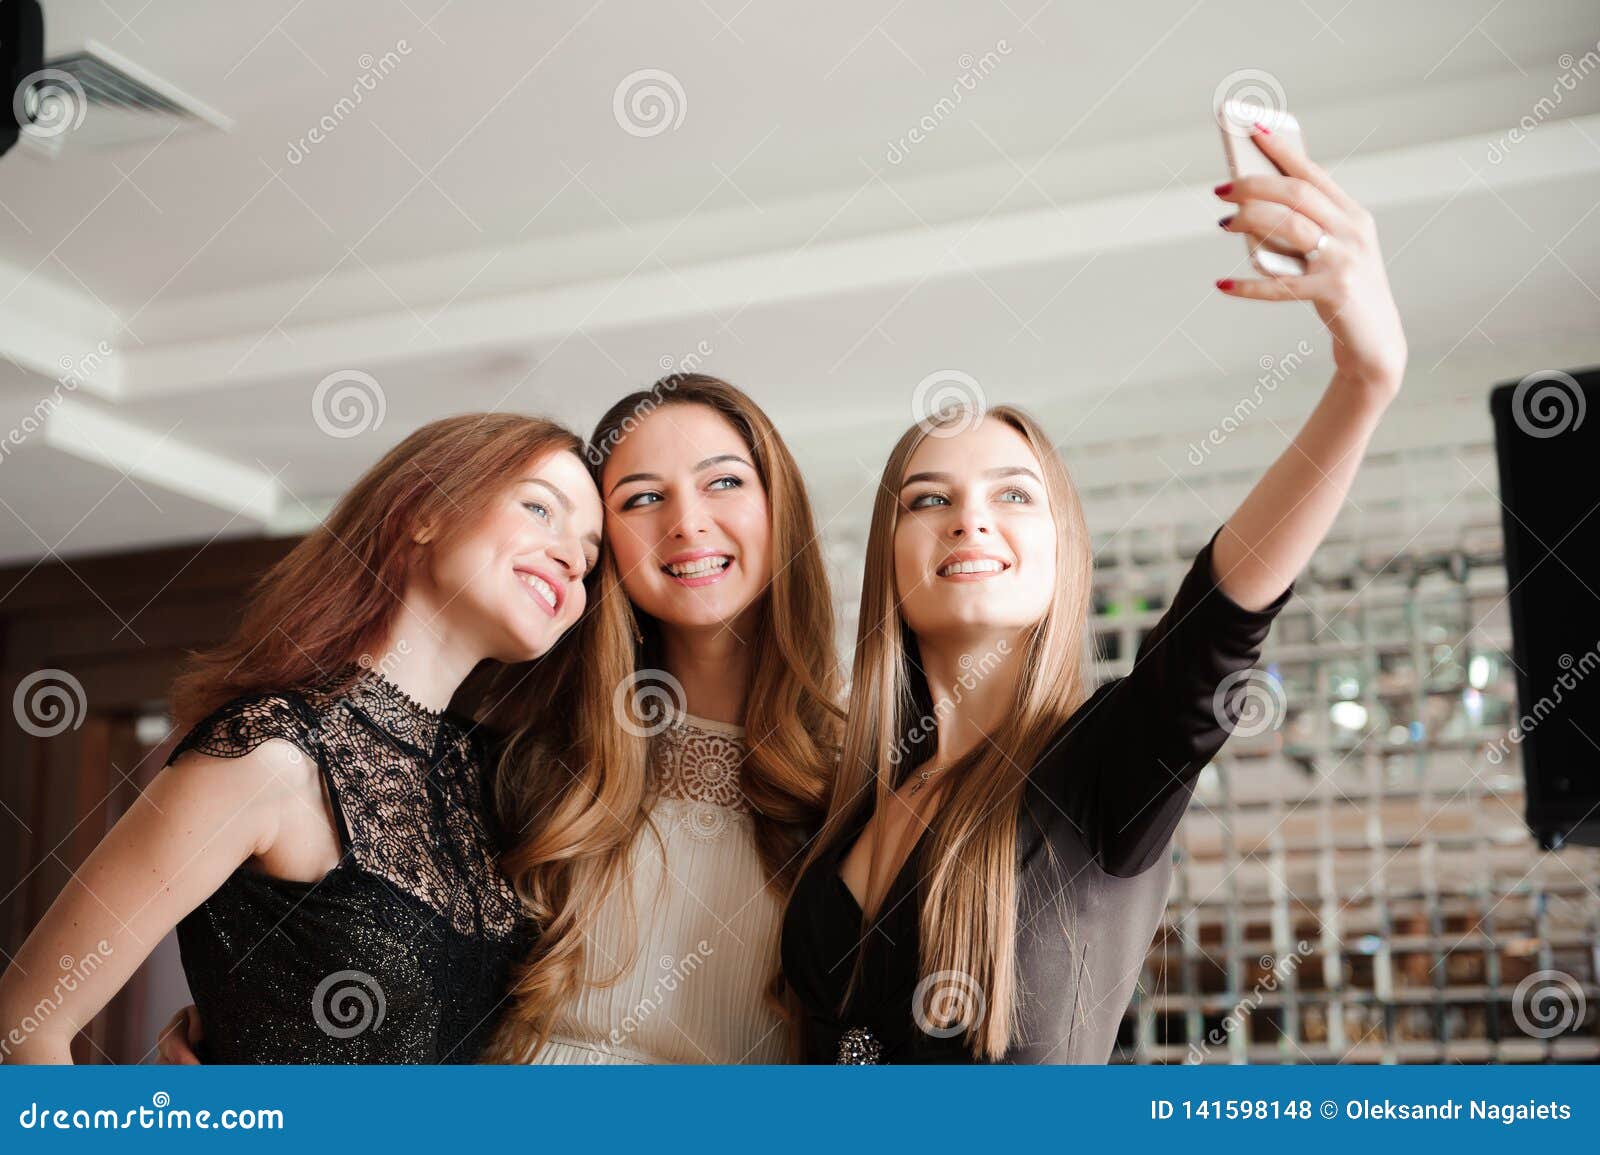 Three Young Girls are Doing Selfie Photo in a Restaurant. Stock Photo ...